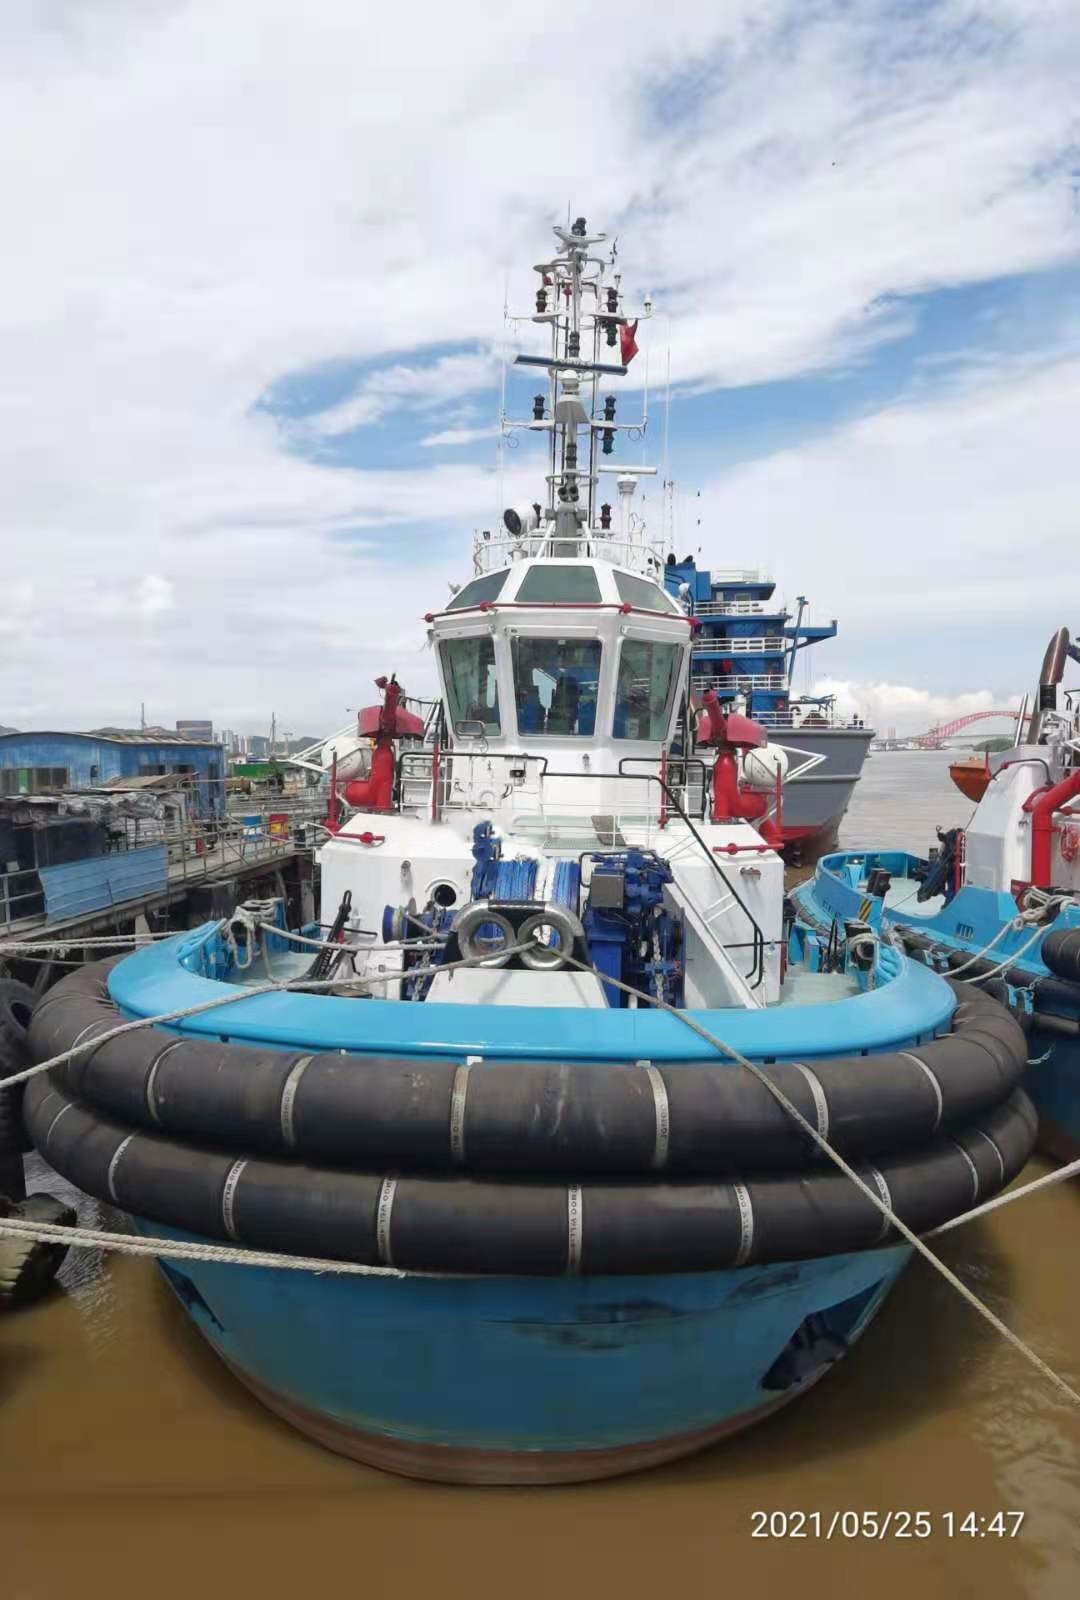 3434 PS Ocean-going Tug For Sale